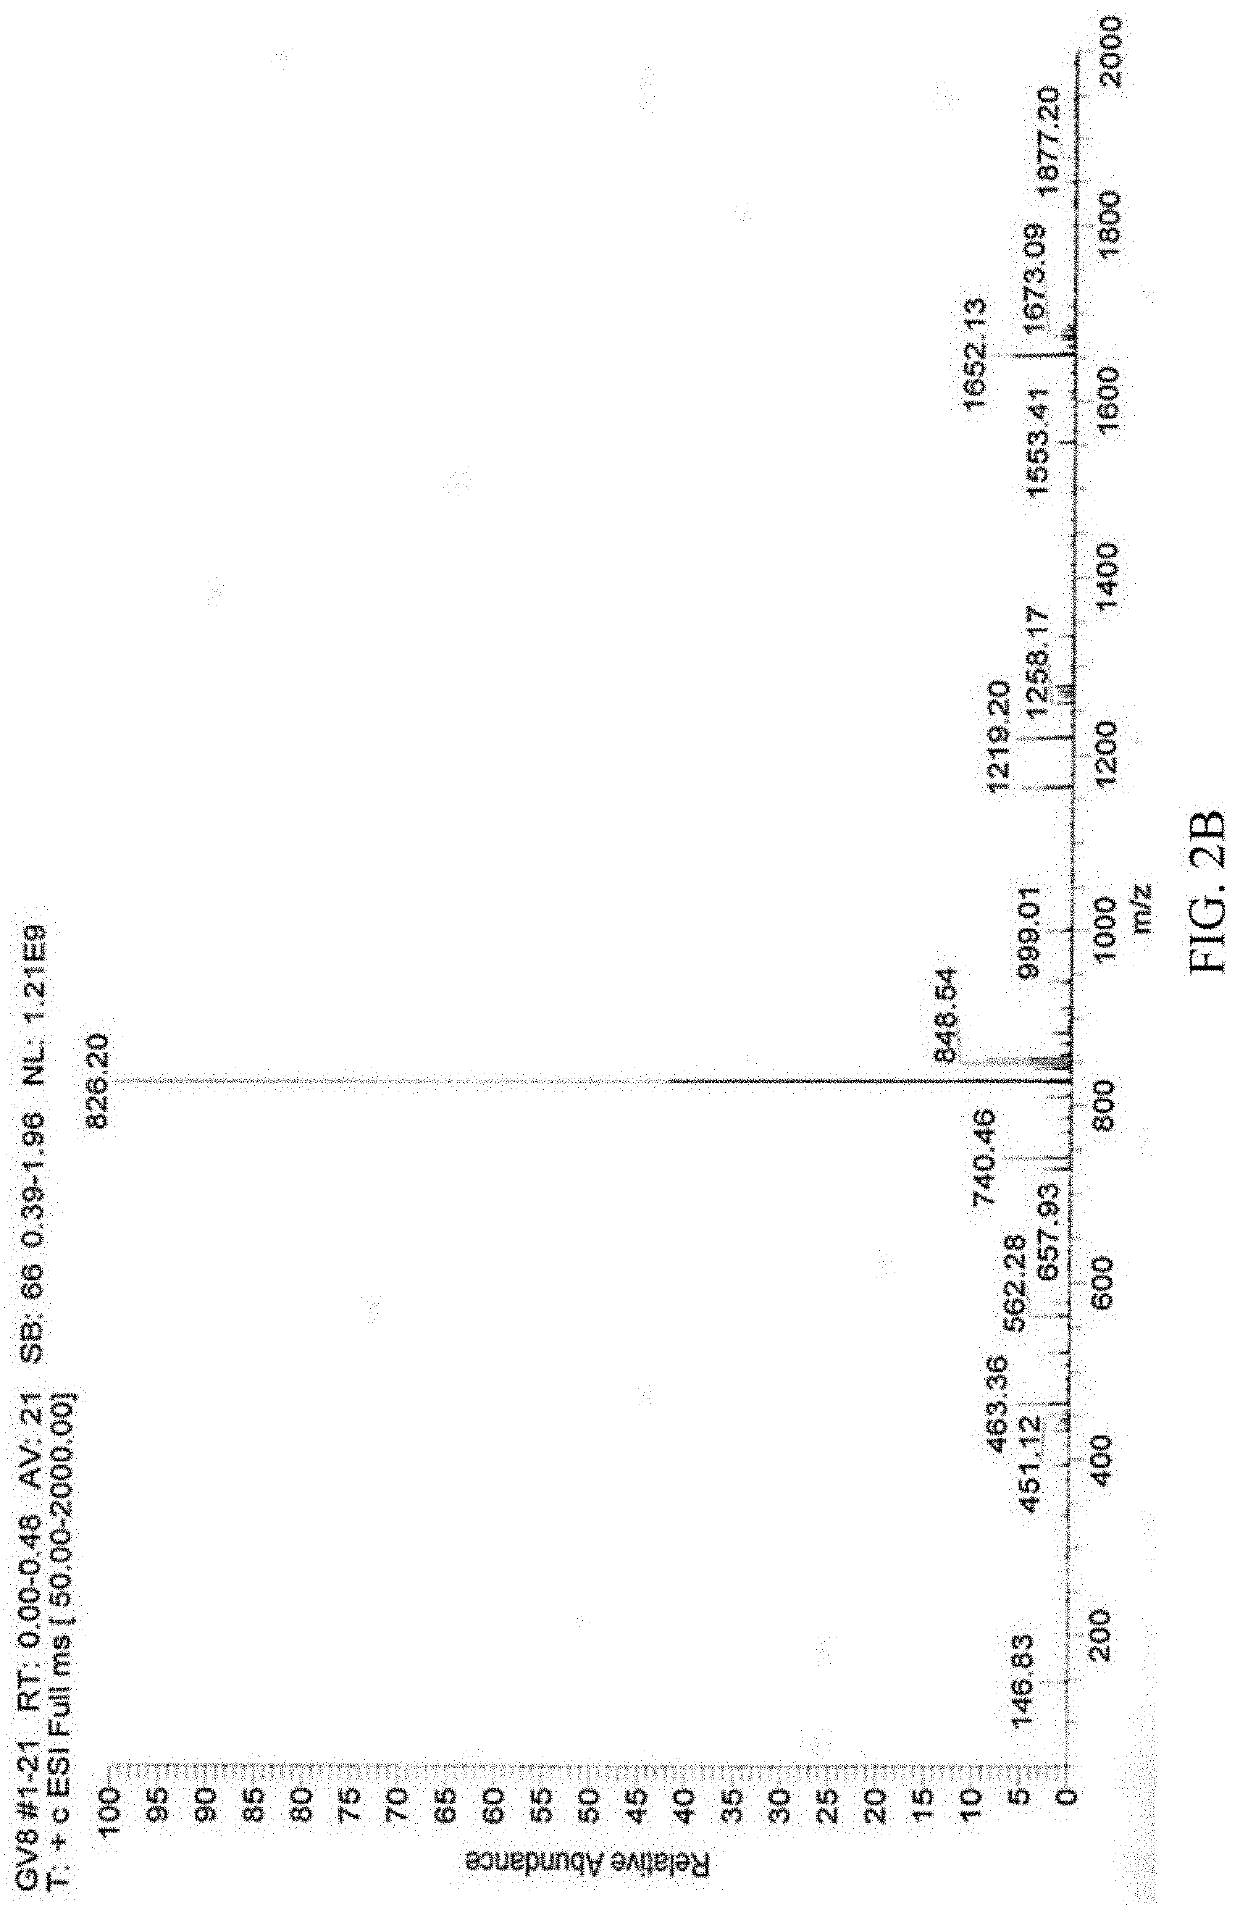 Hydrogel-forming peptides, and methods of use thereof